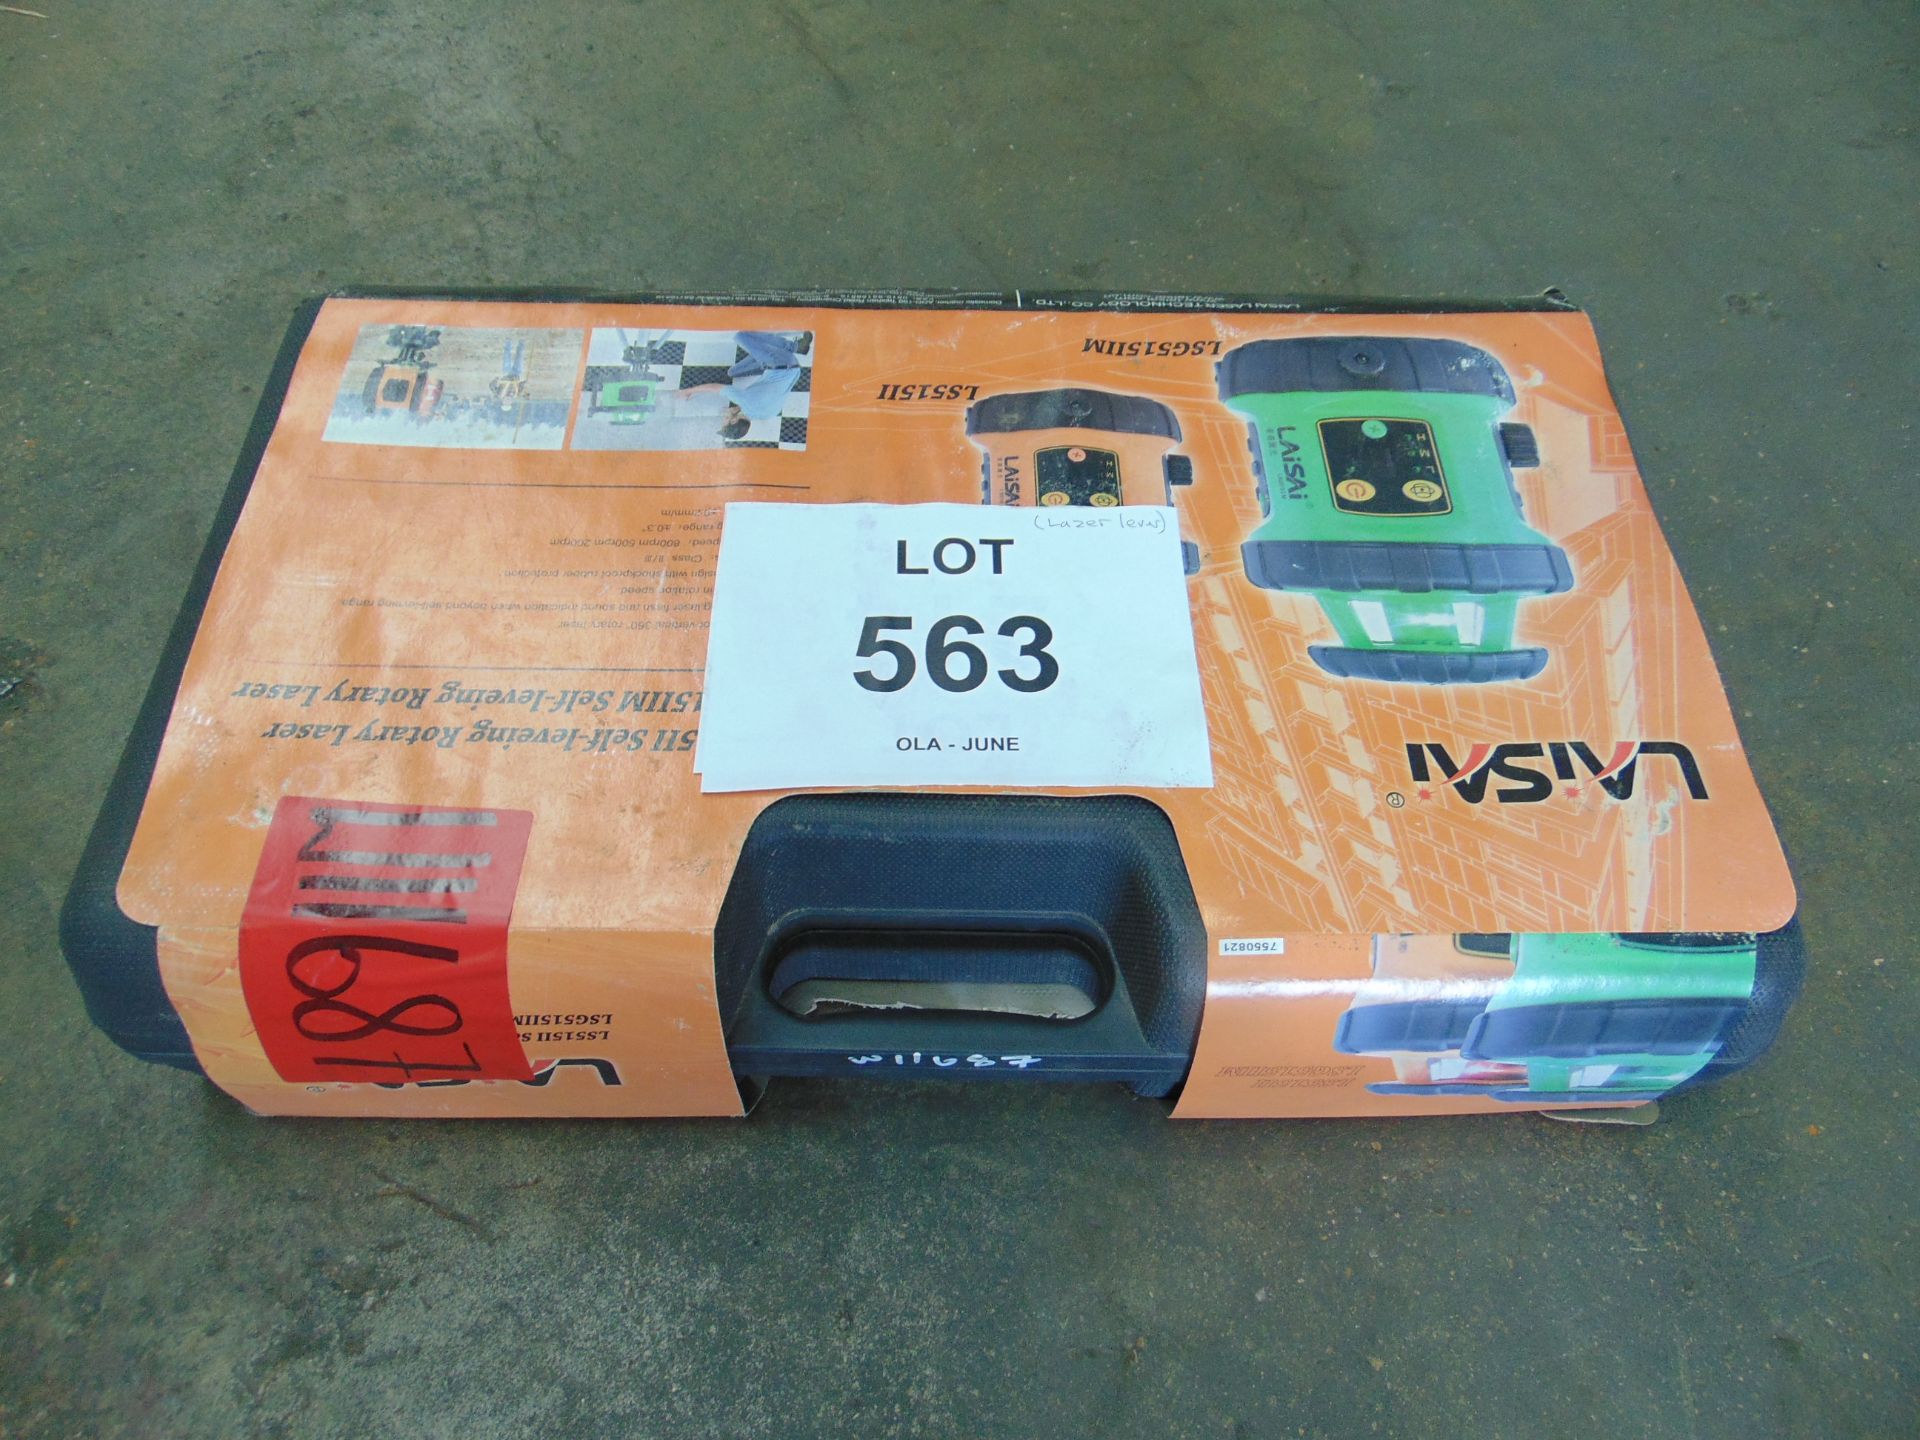 ** BRAND NEW ** LAISAI LS515II Surveying Self Levelling Rotary Laser Set